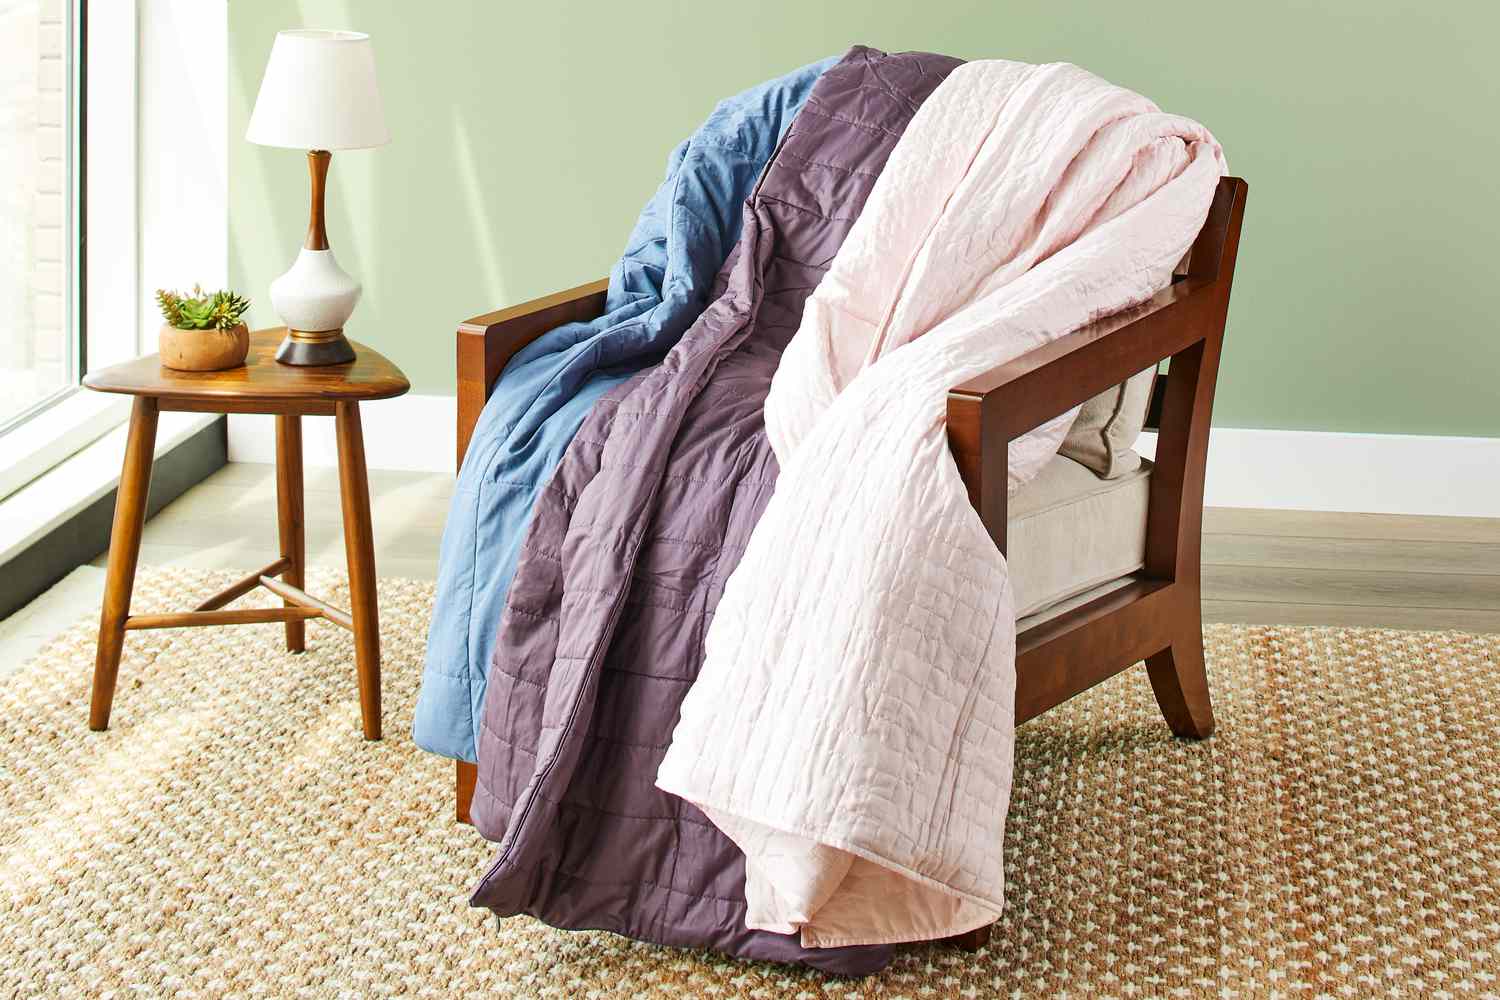 How To Dry A Weighted Blanket